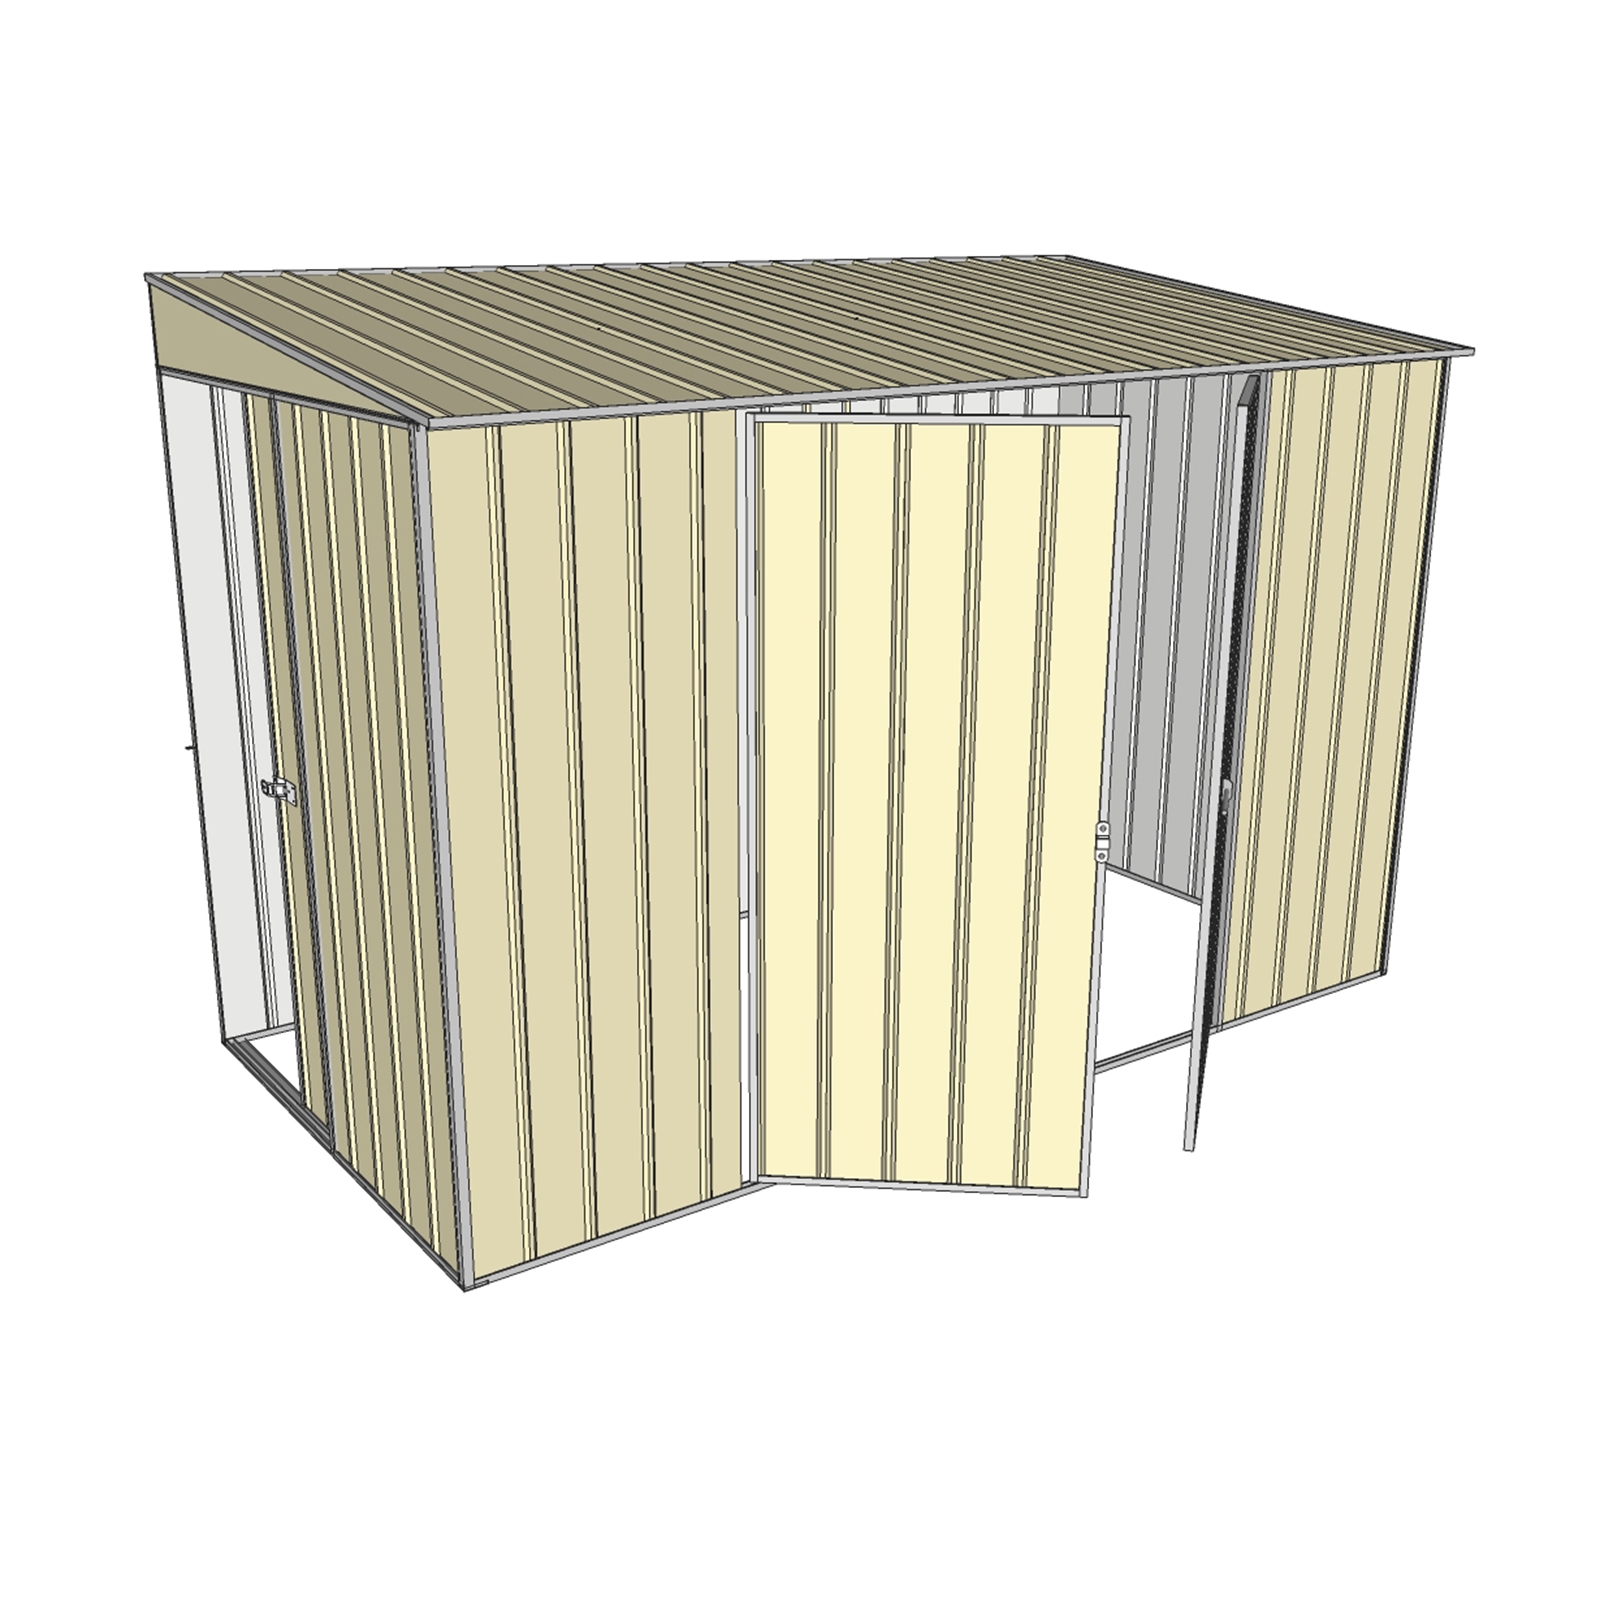 Build-a-Shed 3.0 x 2.0 x 1.5m Cream Double Hinge and Single Sliding Door Narrow Skillion Shed